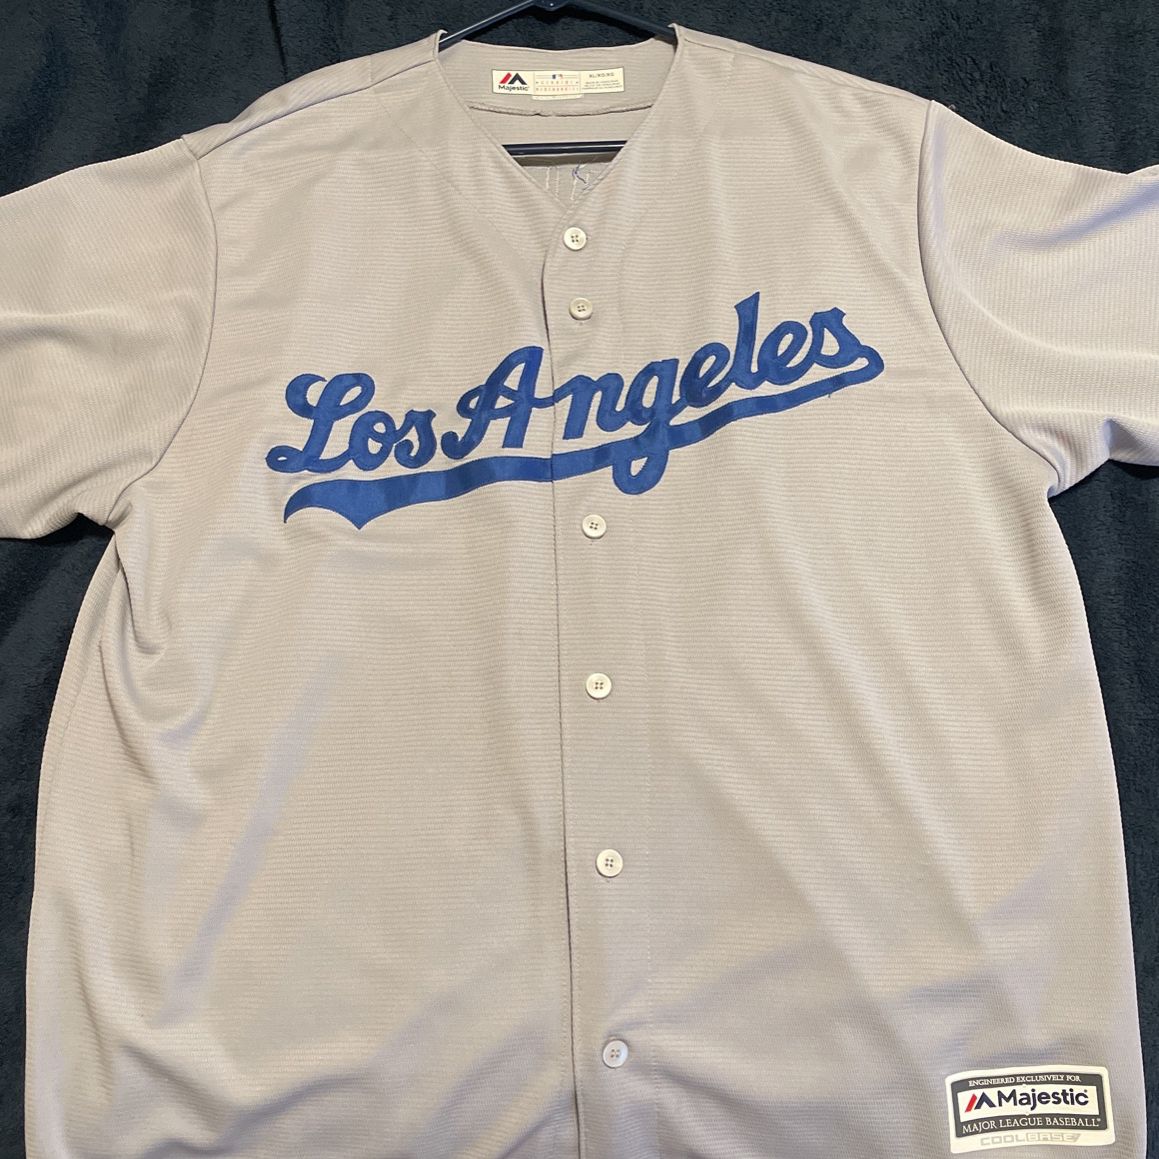 Dodger Kershaw Jersey 2T for Sale in Tulare, CA - OfferUp